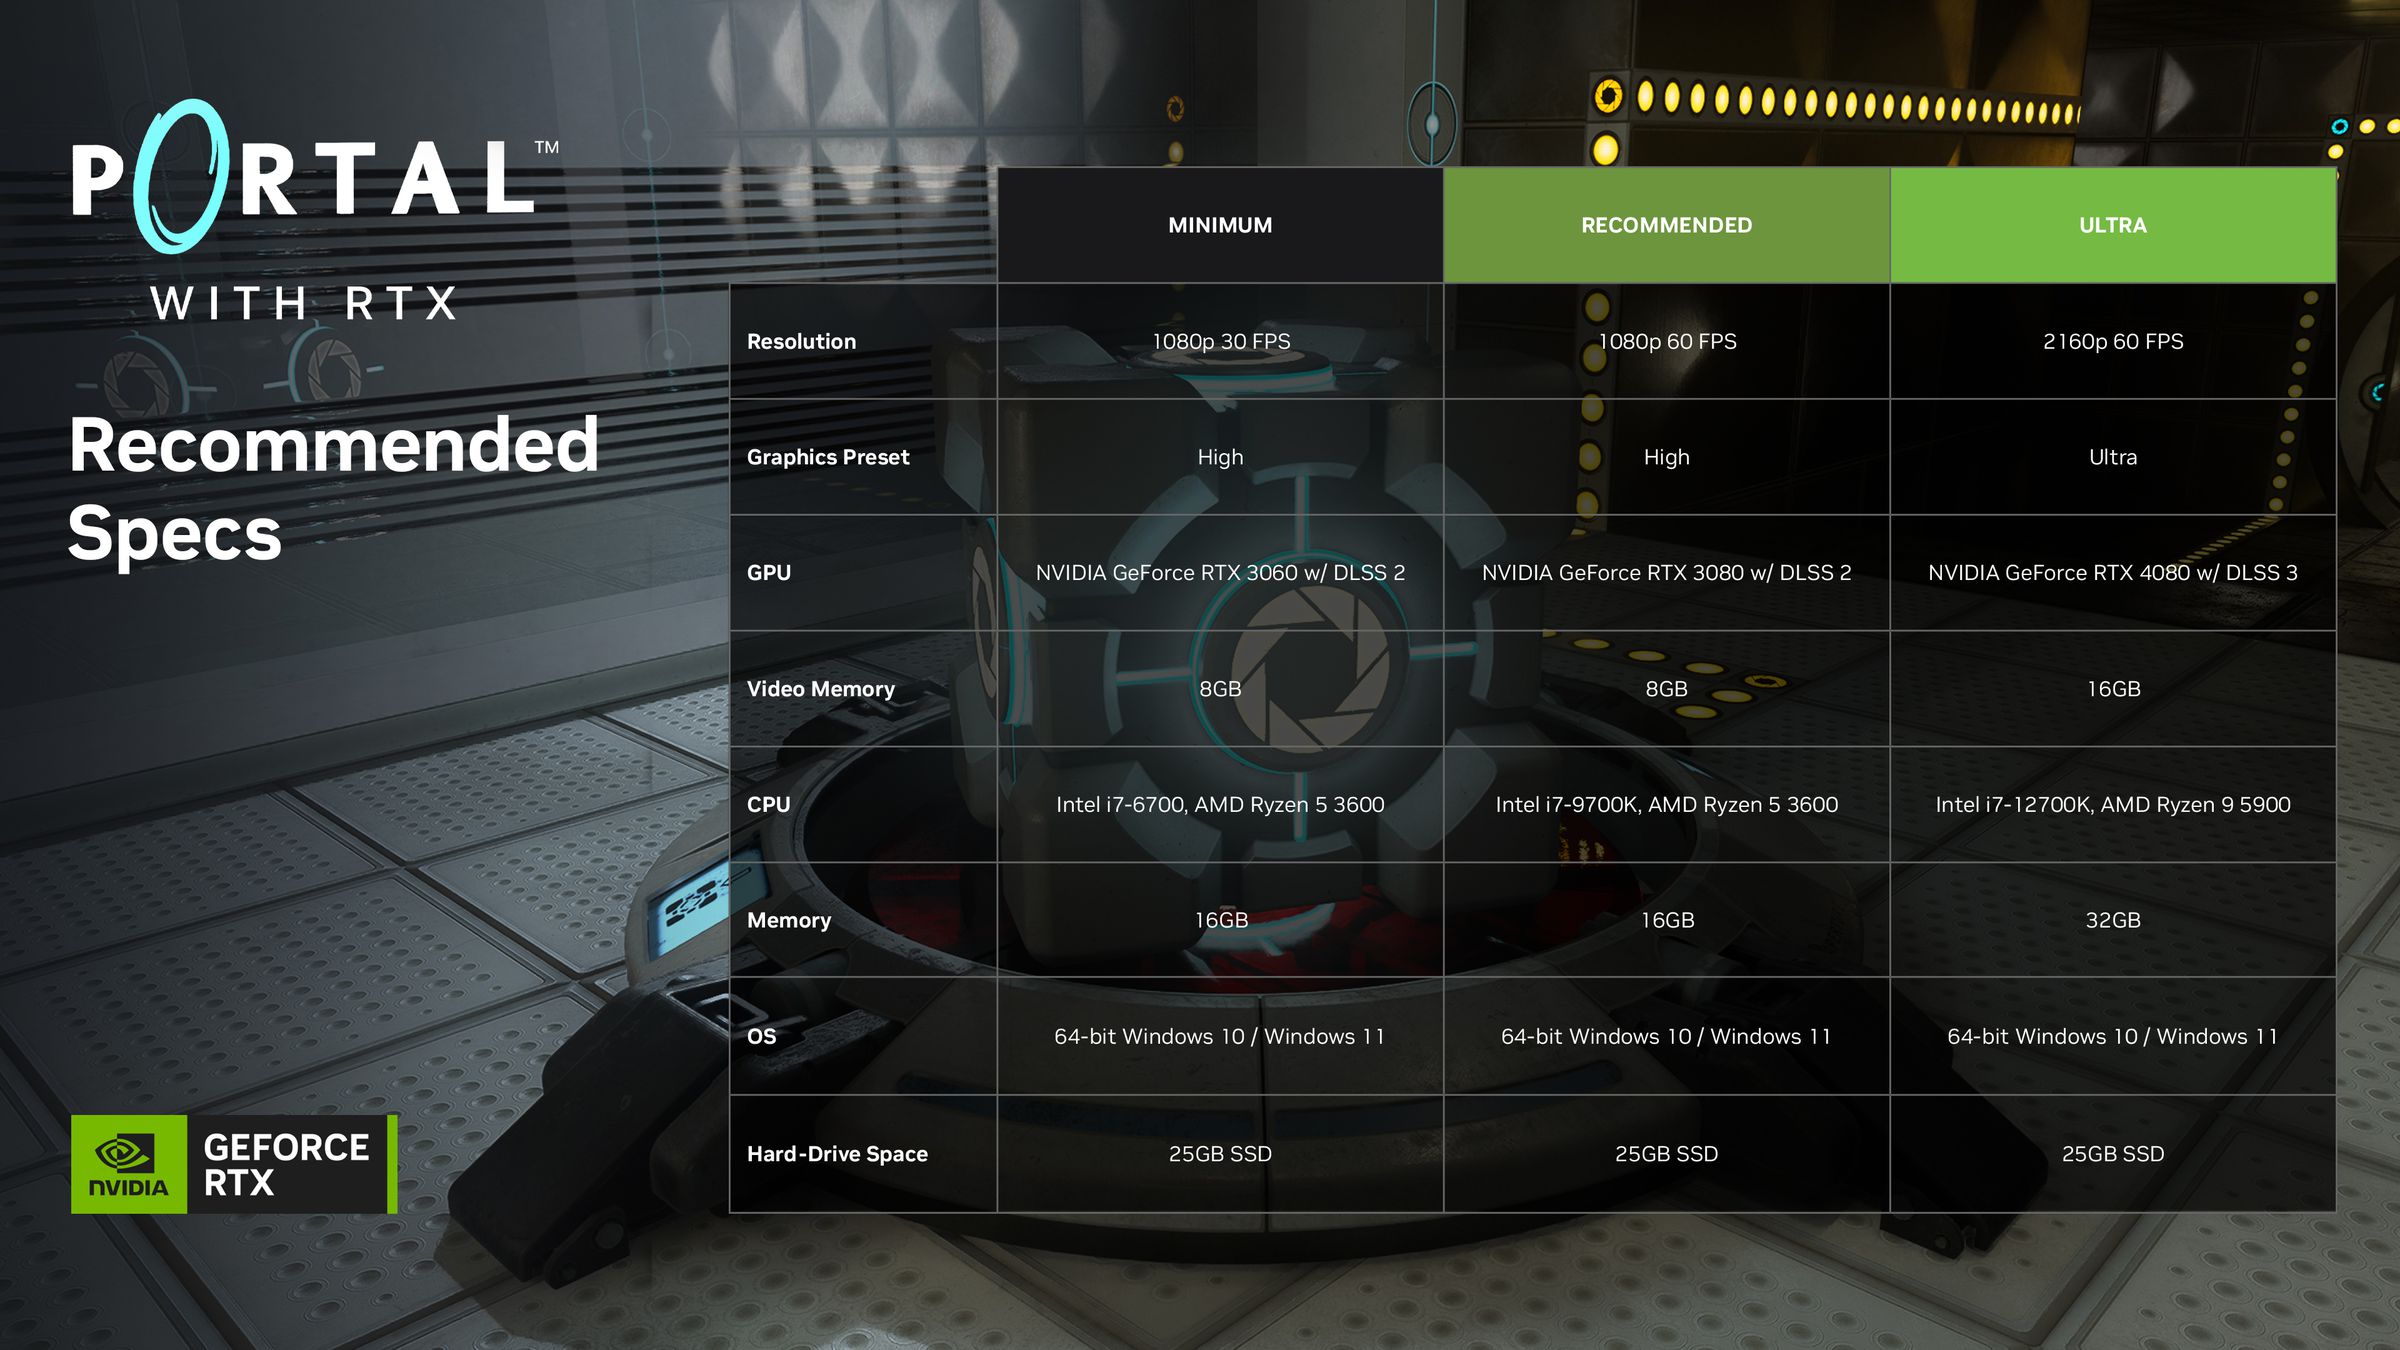 Portal with RTX system requirements.